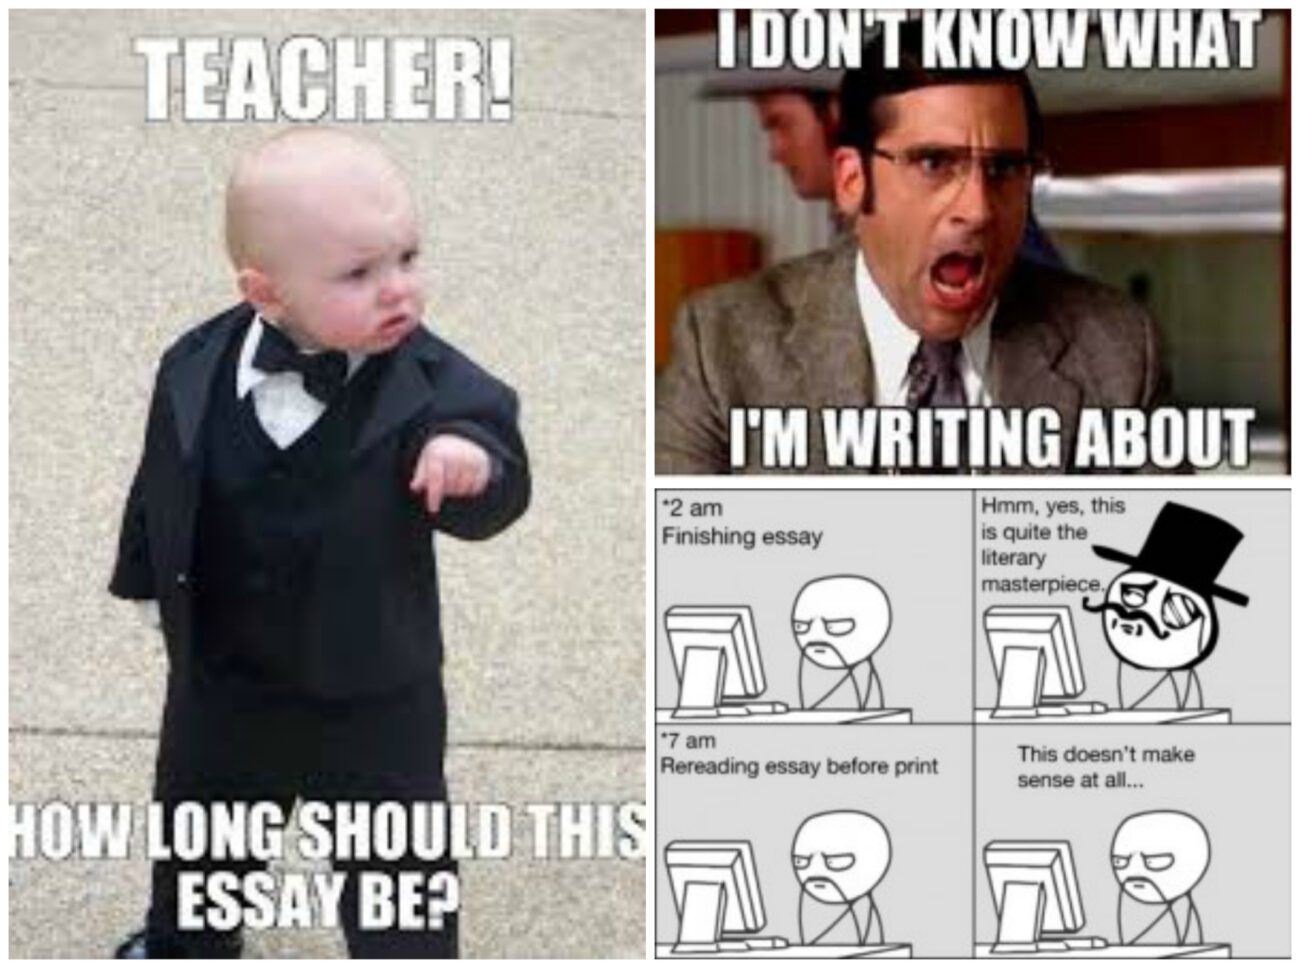 Stop procrastinating on that essay that's due tomorrow! But first, laugh at these relatable memes and discover why writing is less painful than you think.